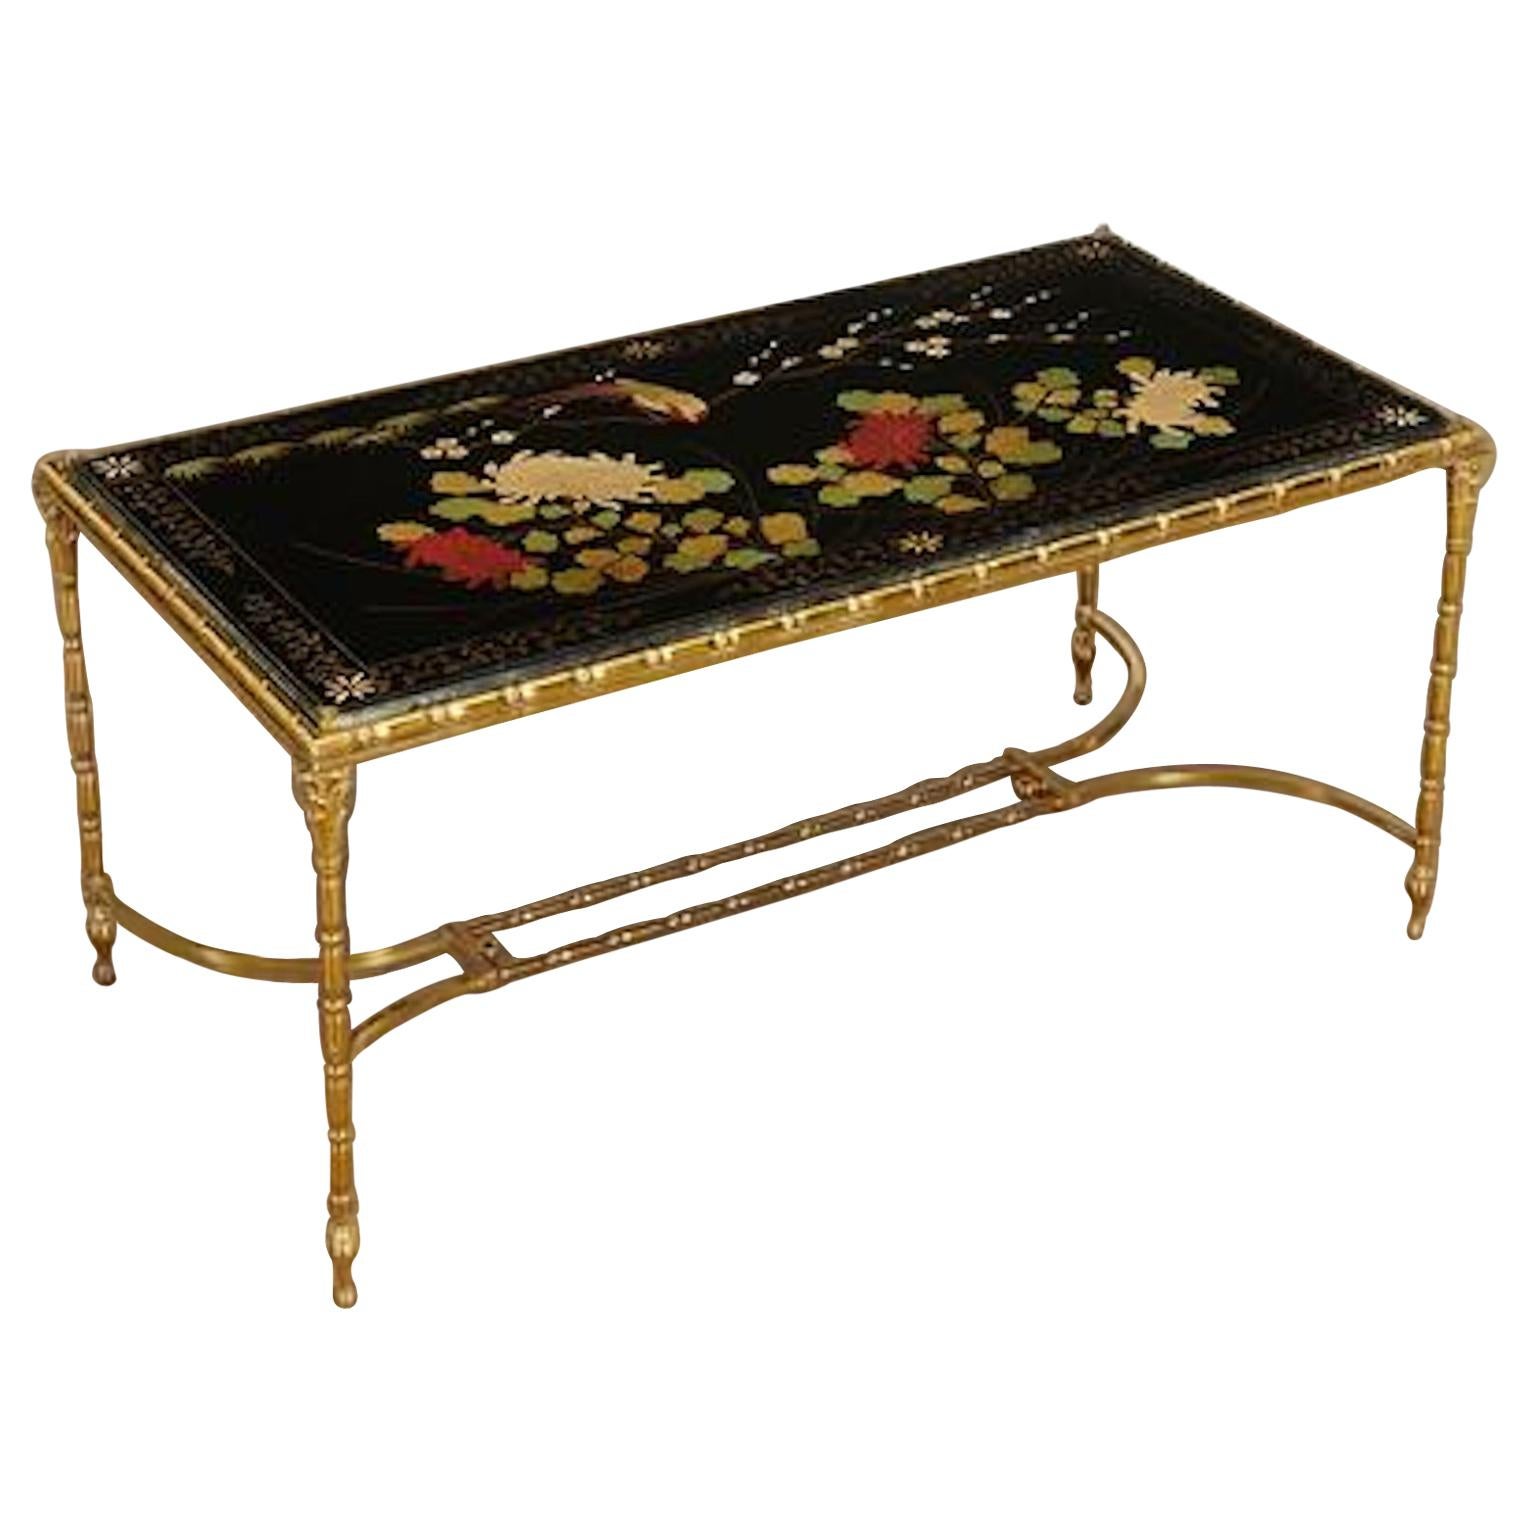 Rare Gilt Bronze Faux Bamboo Coffee Table by Maison Baguès with Floral Motifs